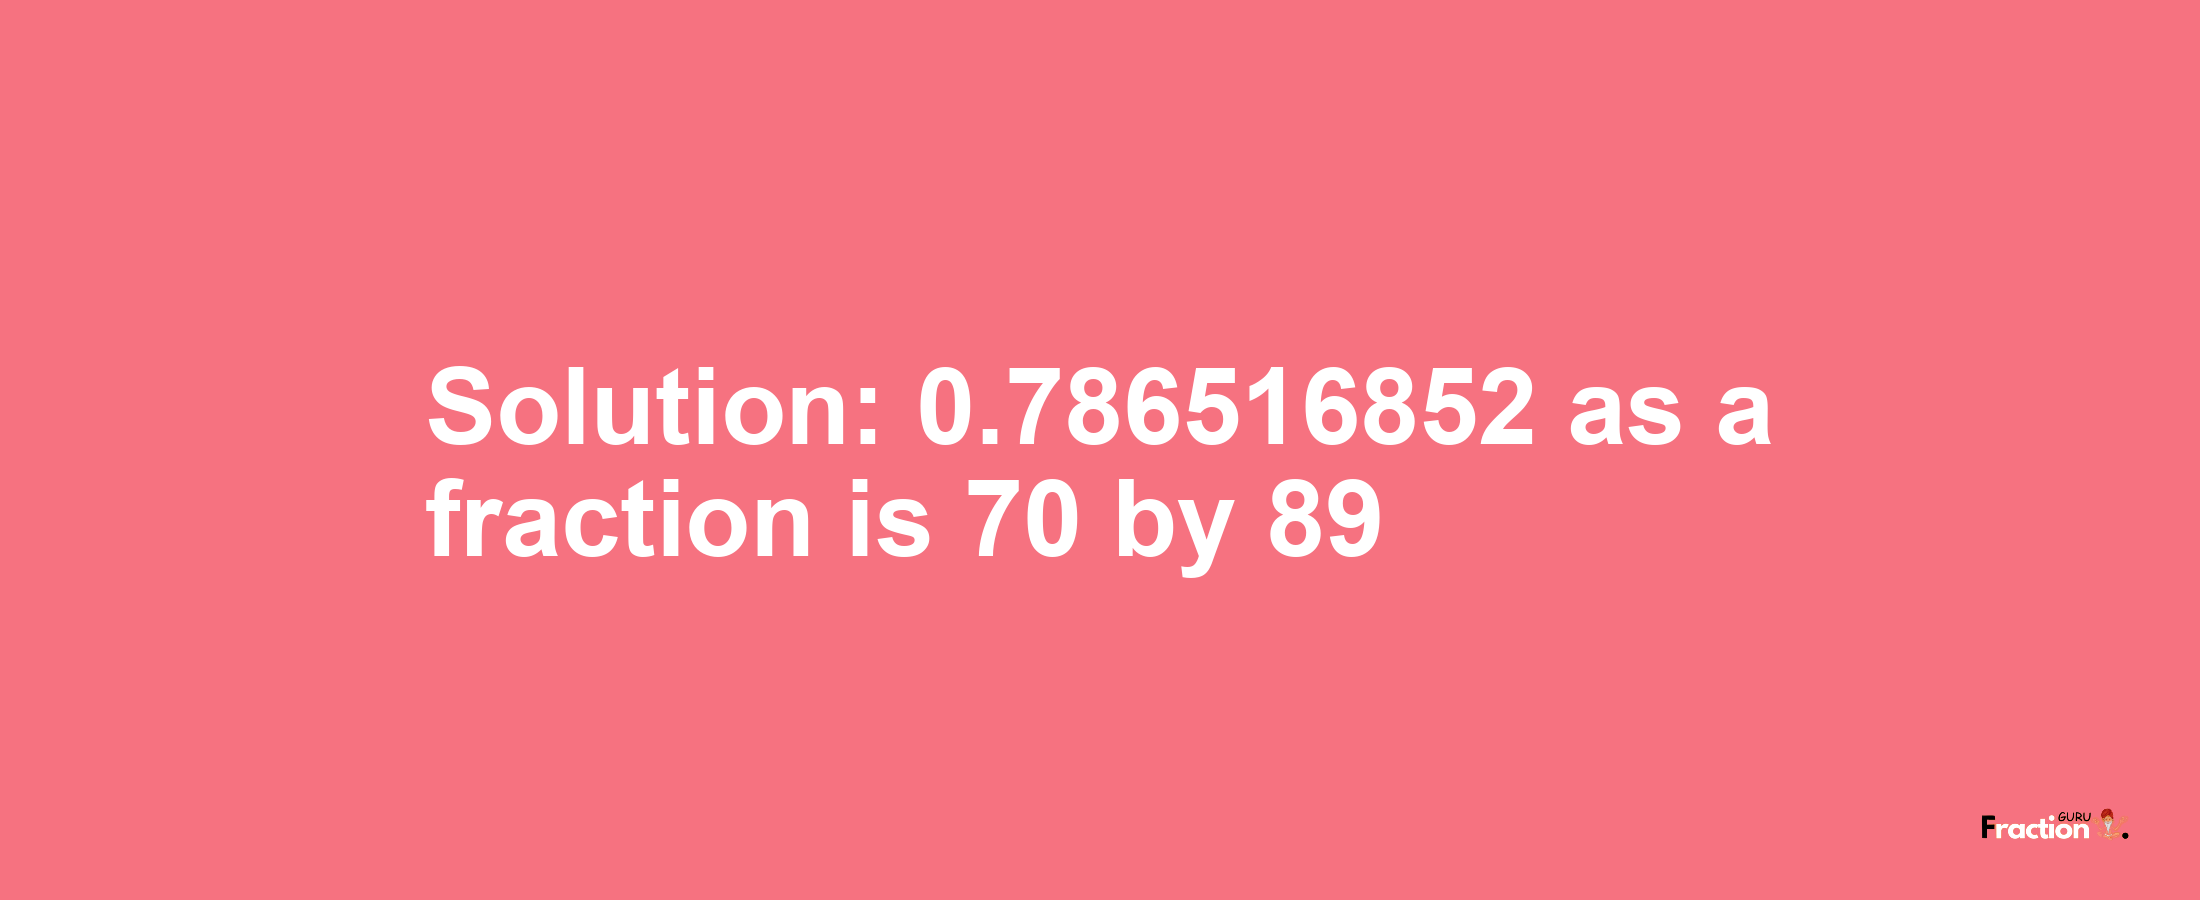 Solution:0.786516852 as a fraction is 70/89